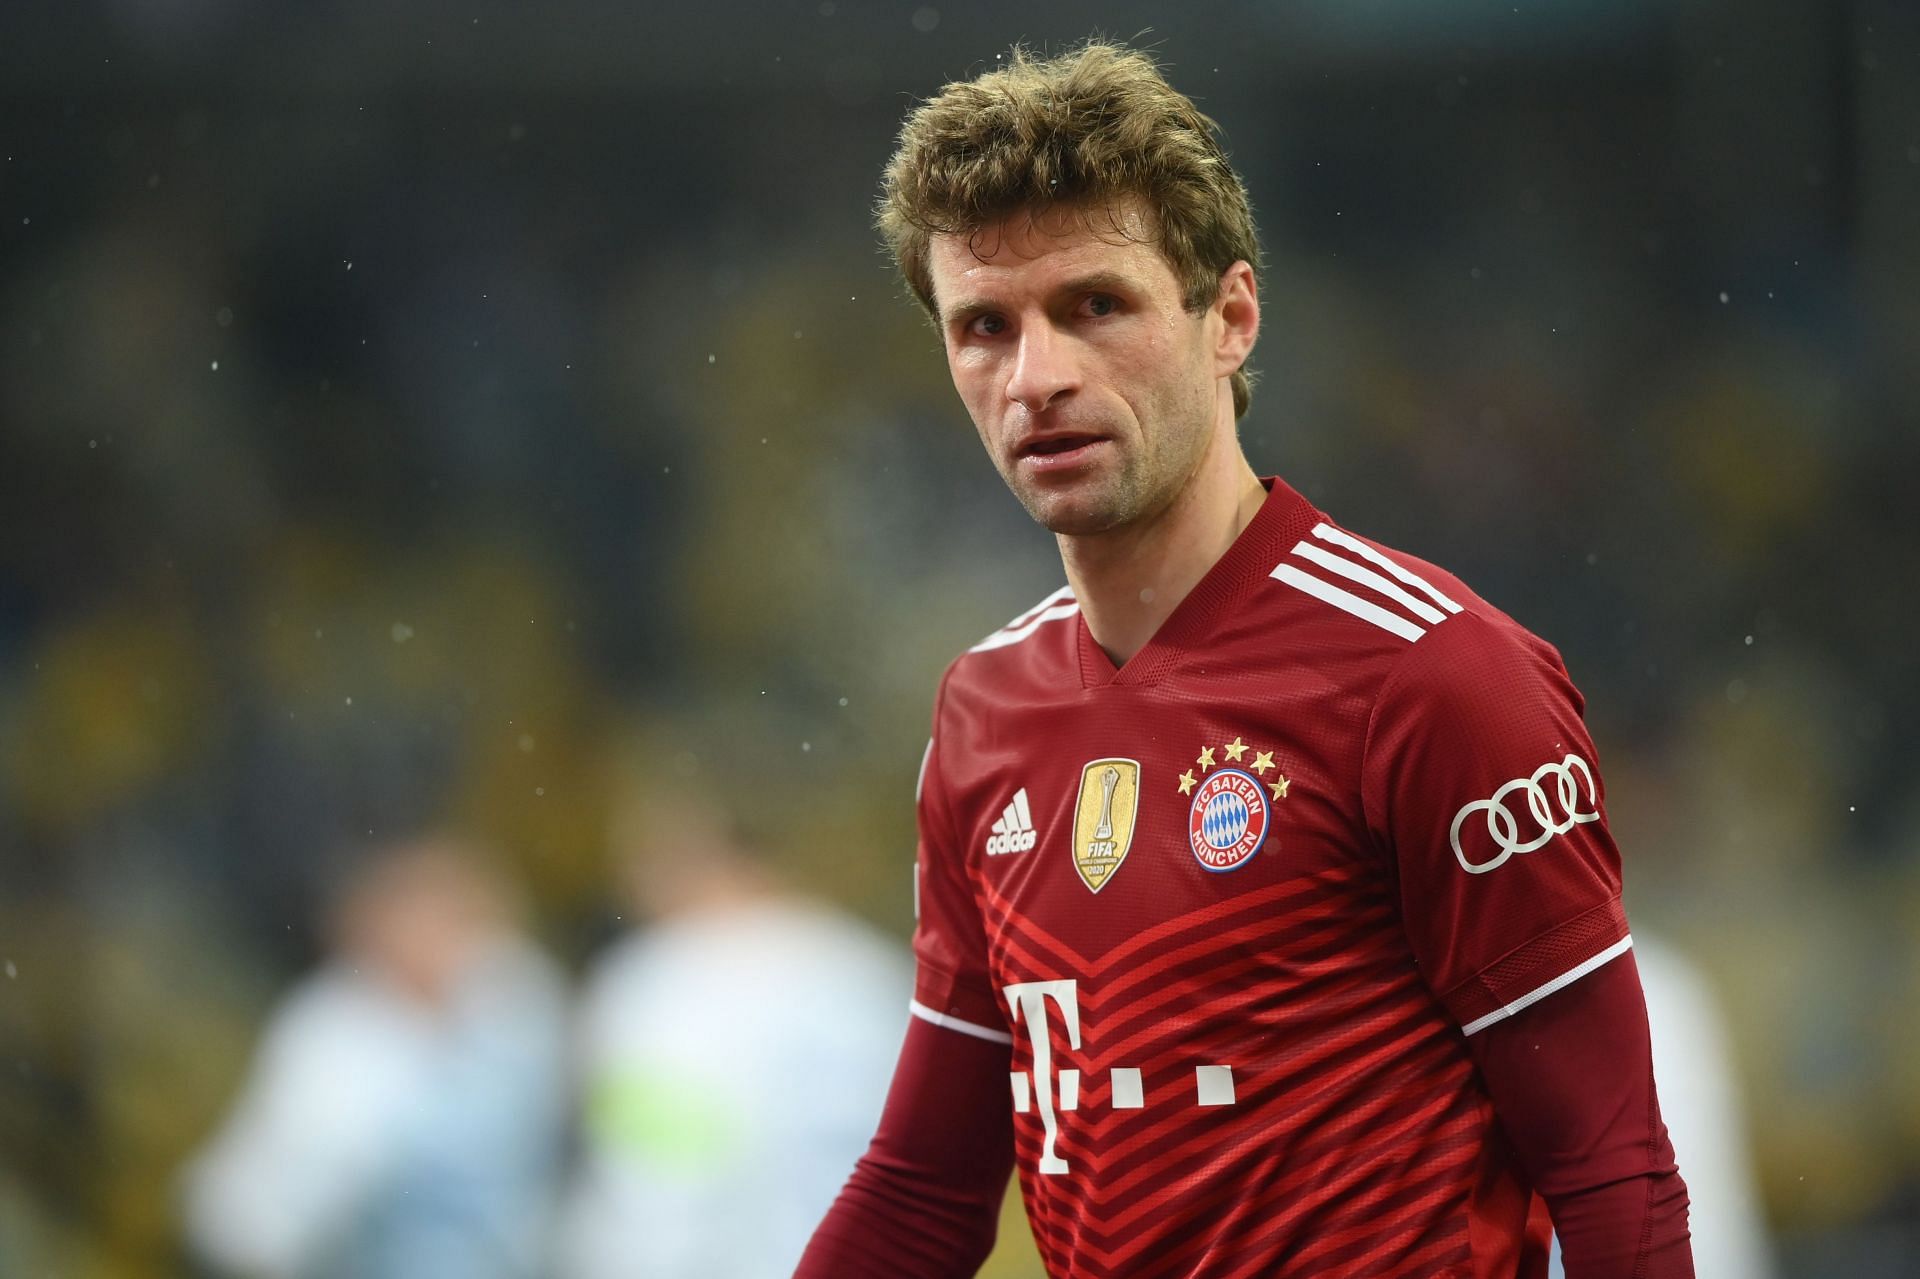 Thomas Muller has been a standout player for club and country.